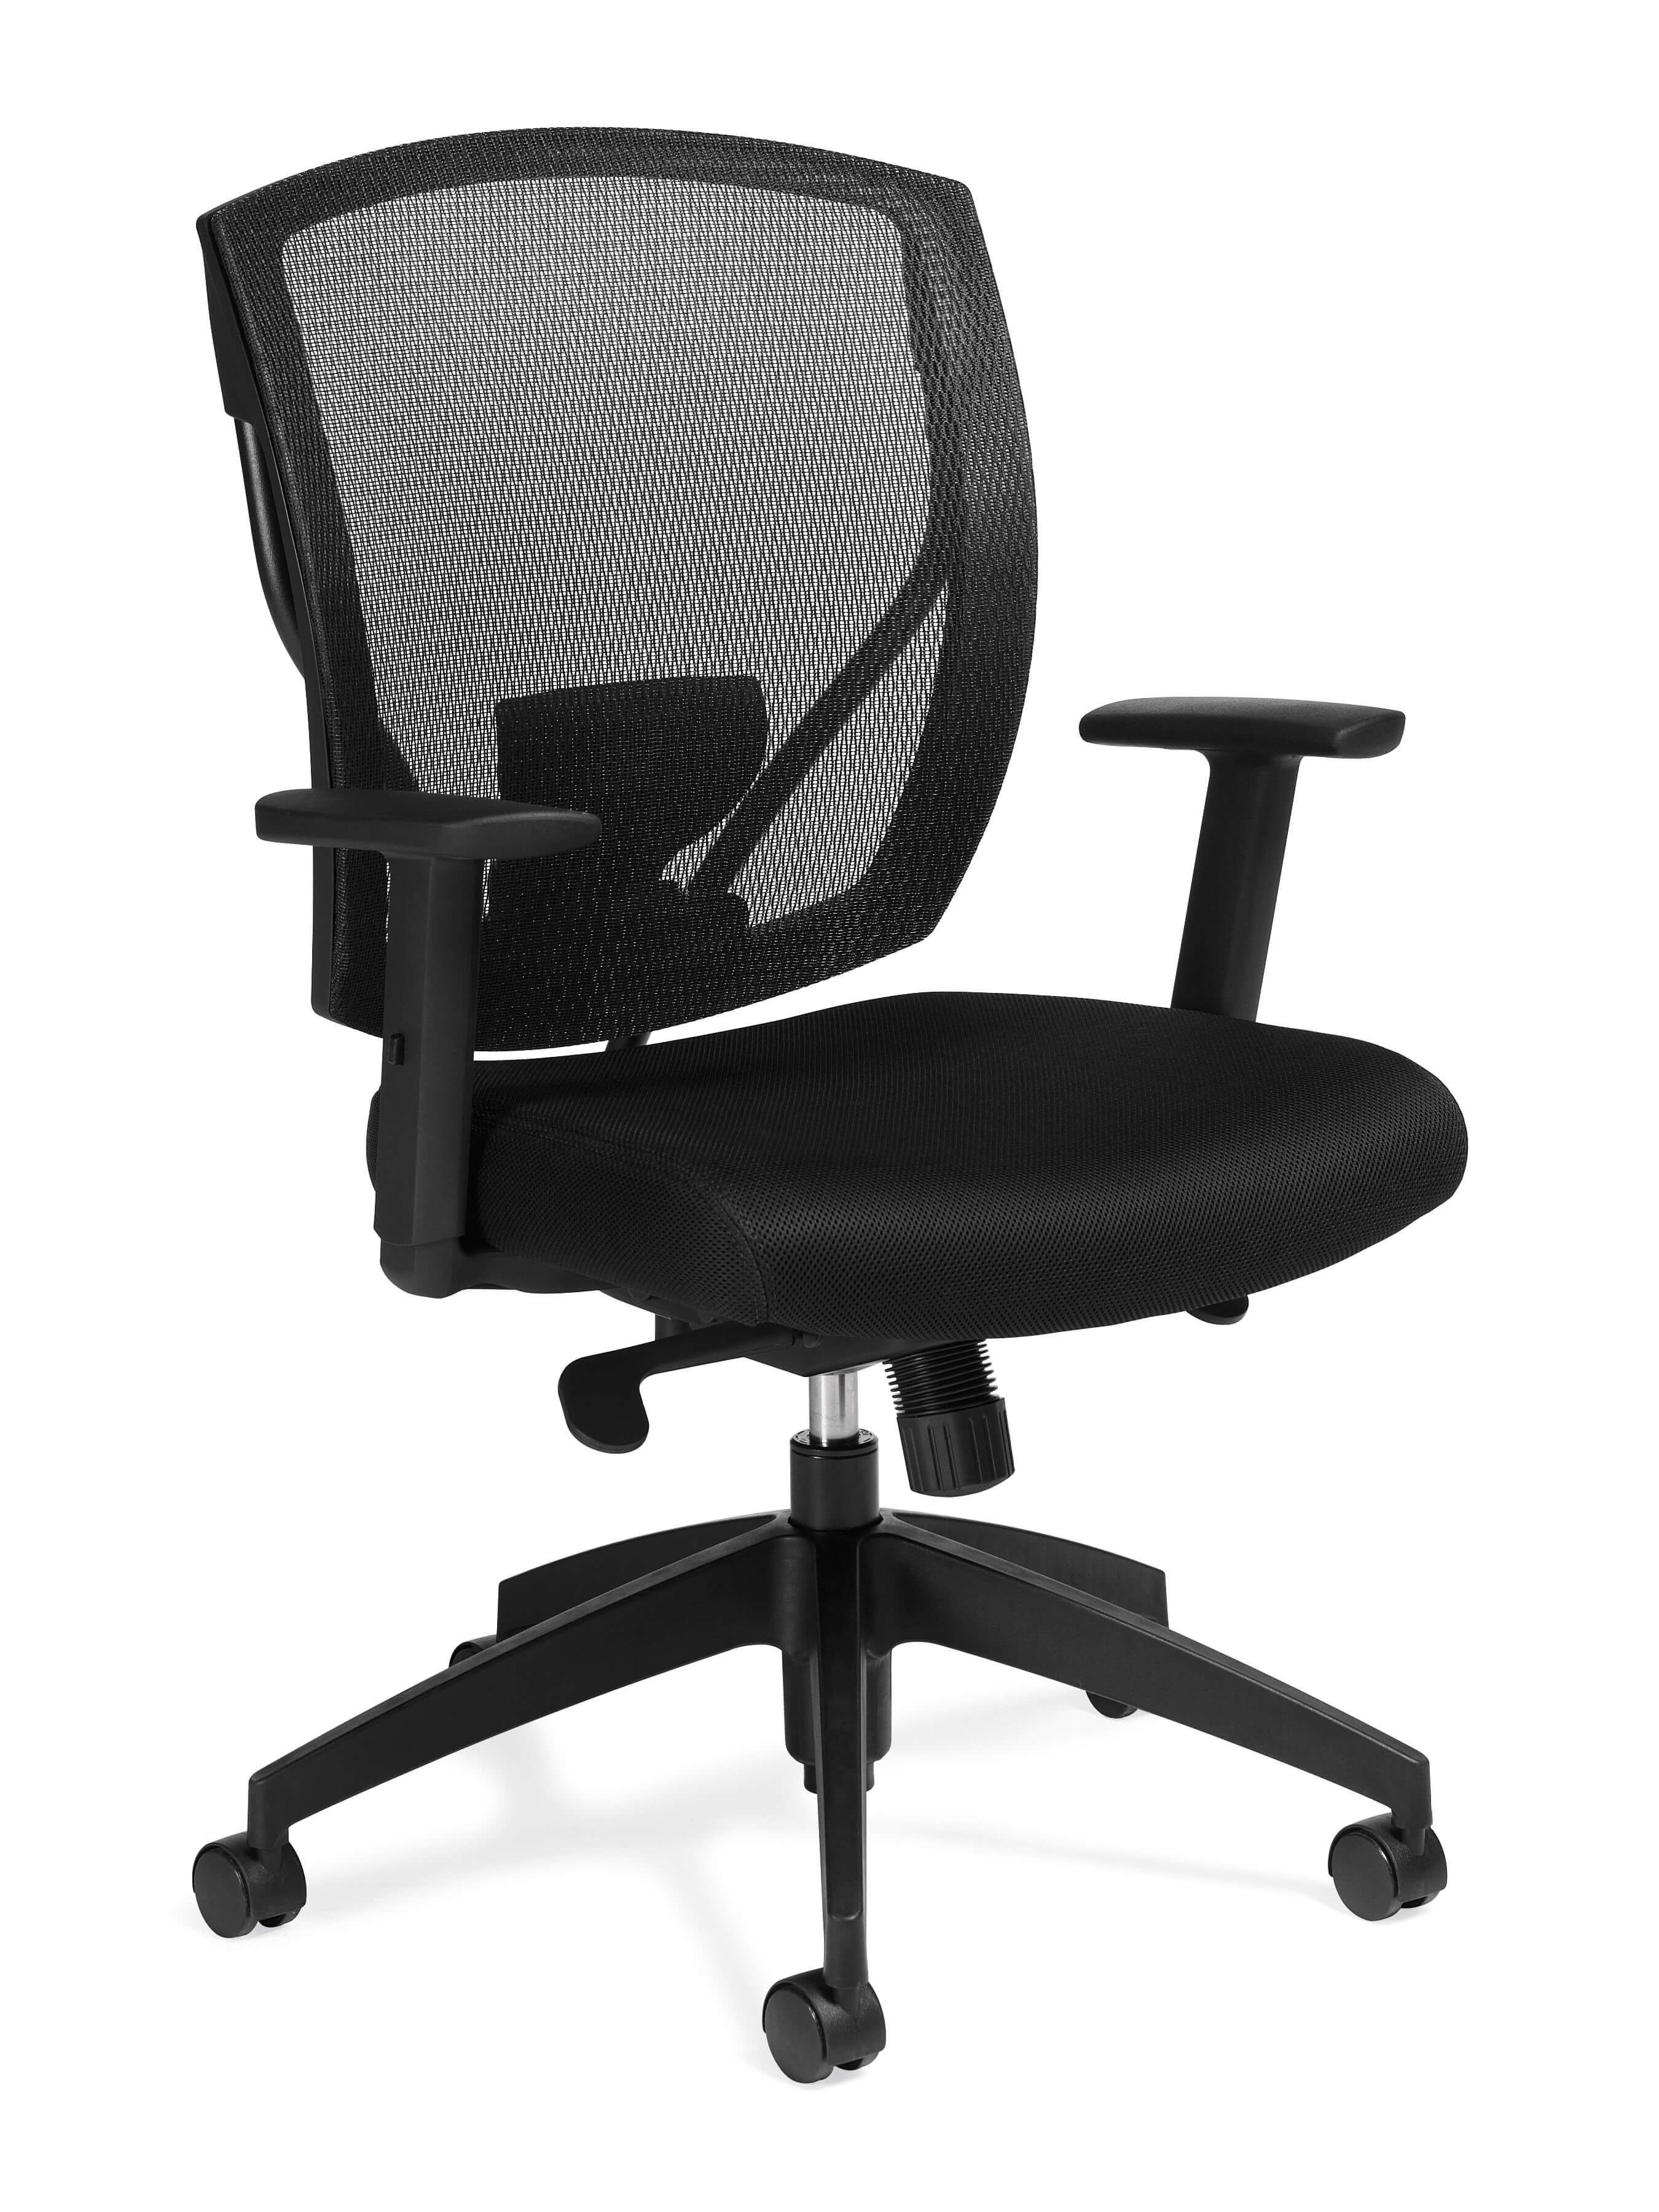 chairs-for-office-mesh-office-chairs.jpg